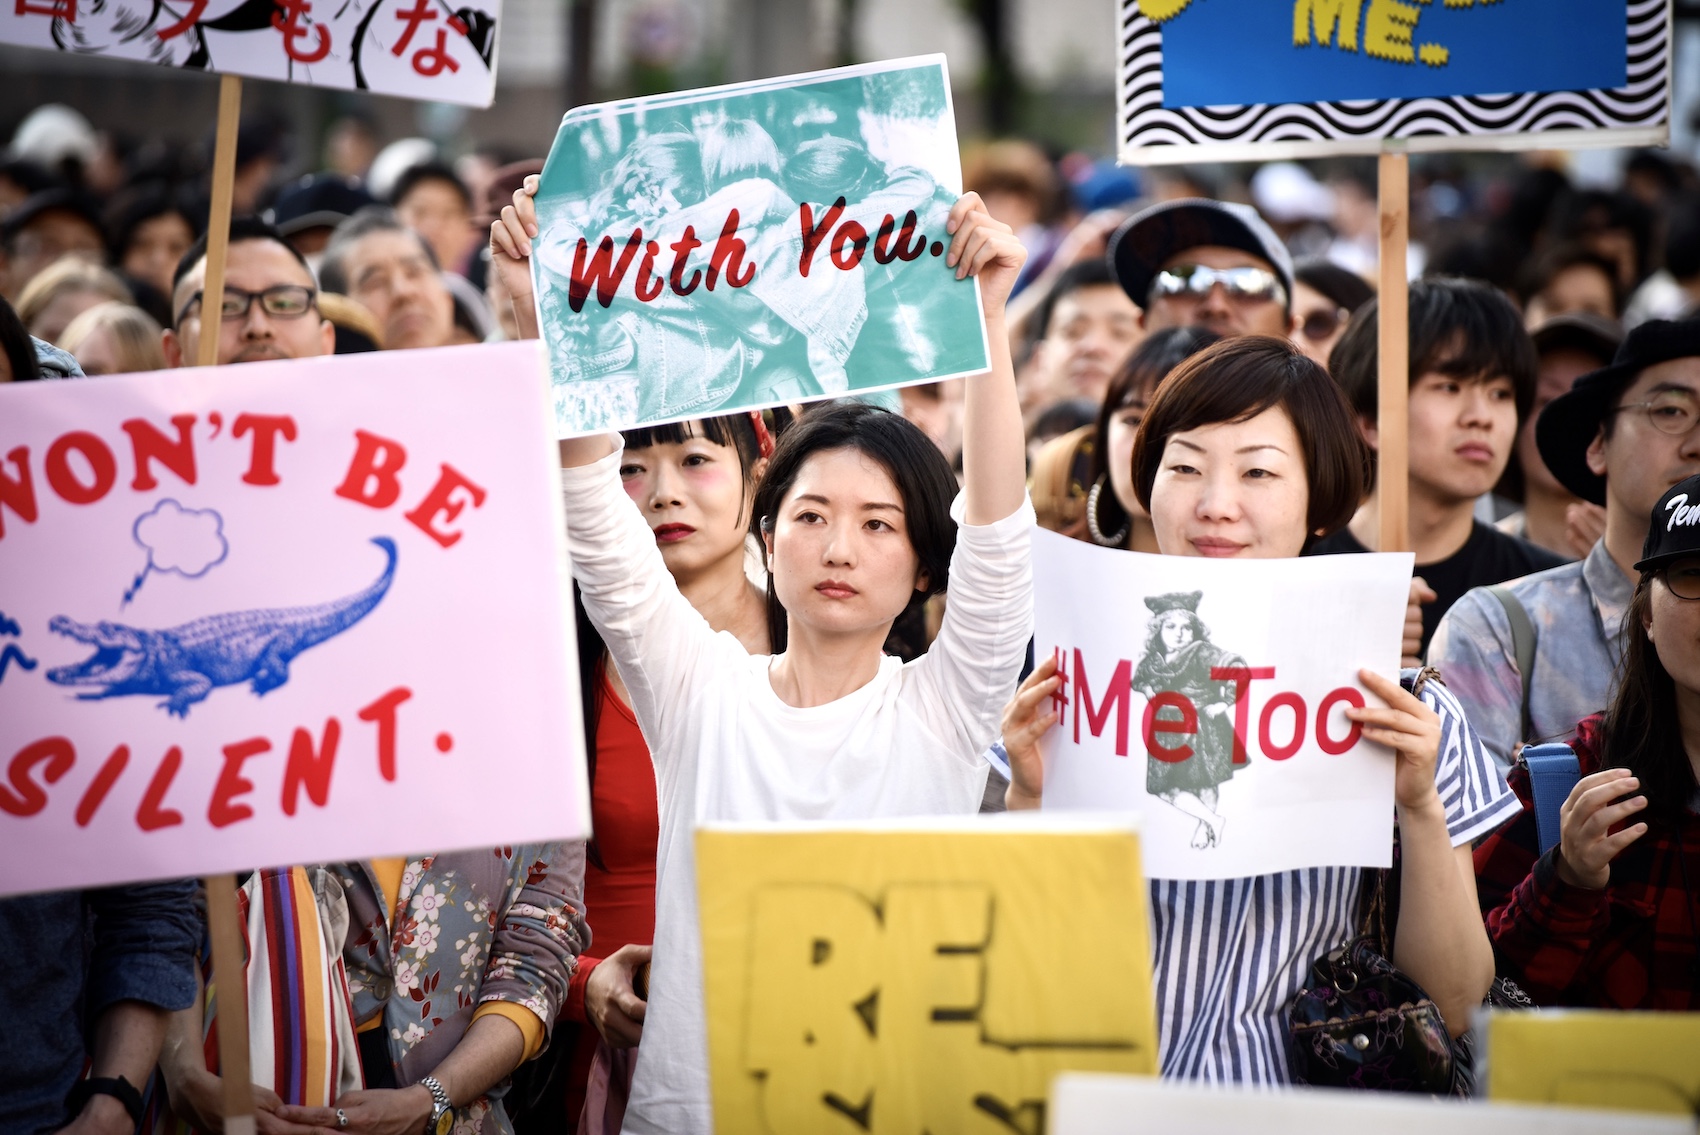 Demonstrators hold signs during a rally against sexual harassment in Shinjuku, Tokyo